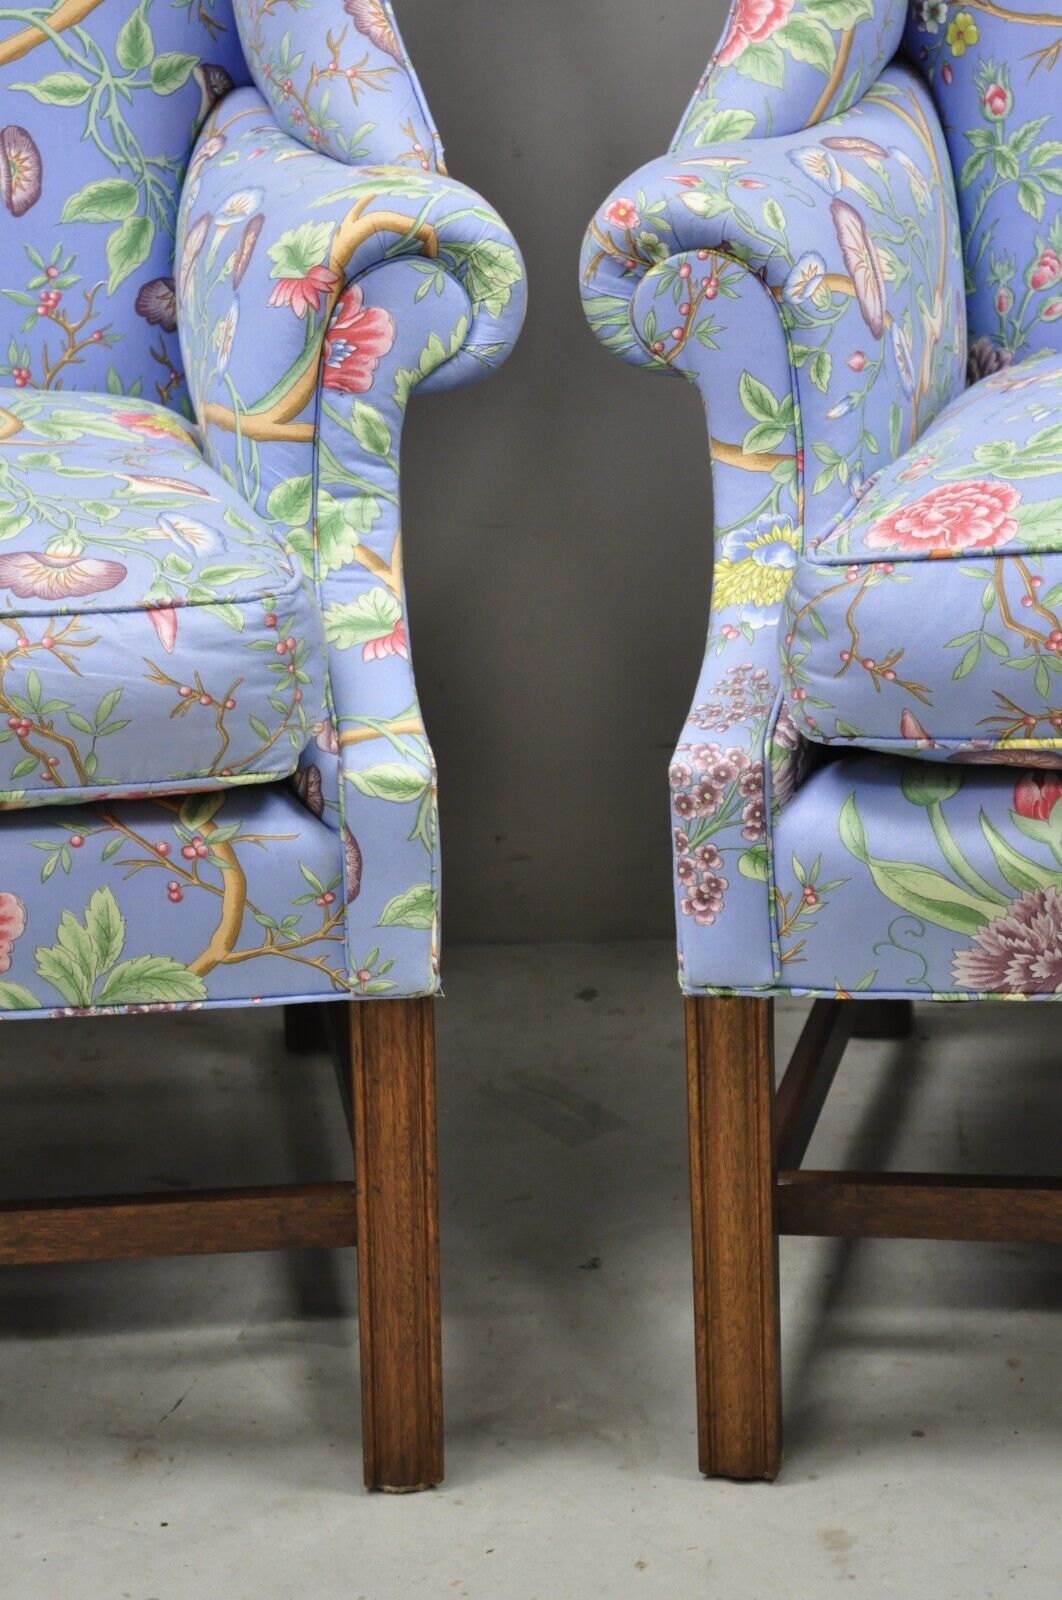 Vintage English Edwardian Style Mahogany Blue Floral Wingback Chairs - a Pair